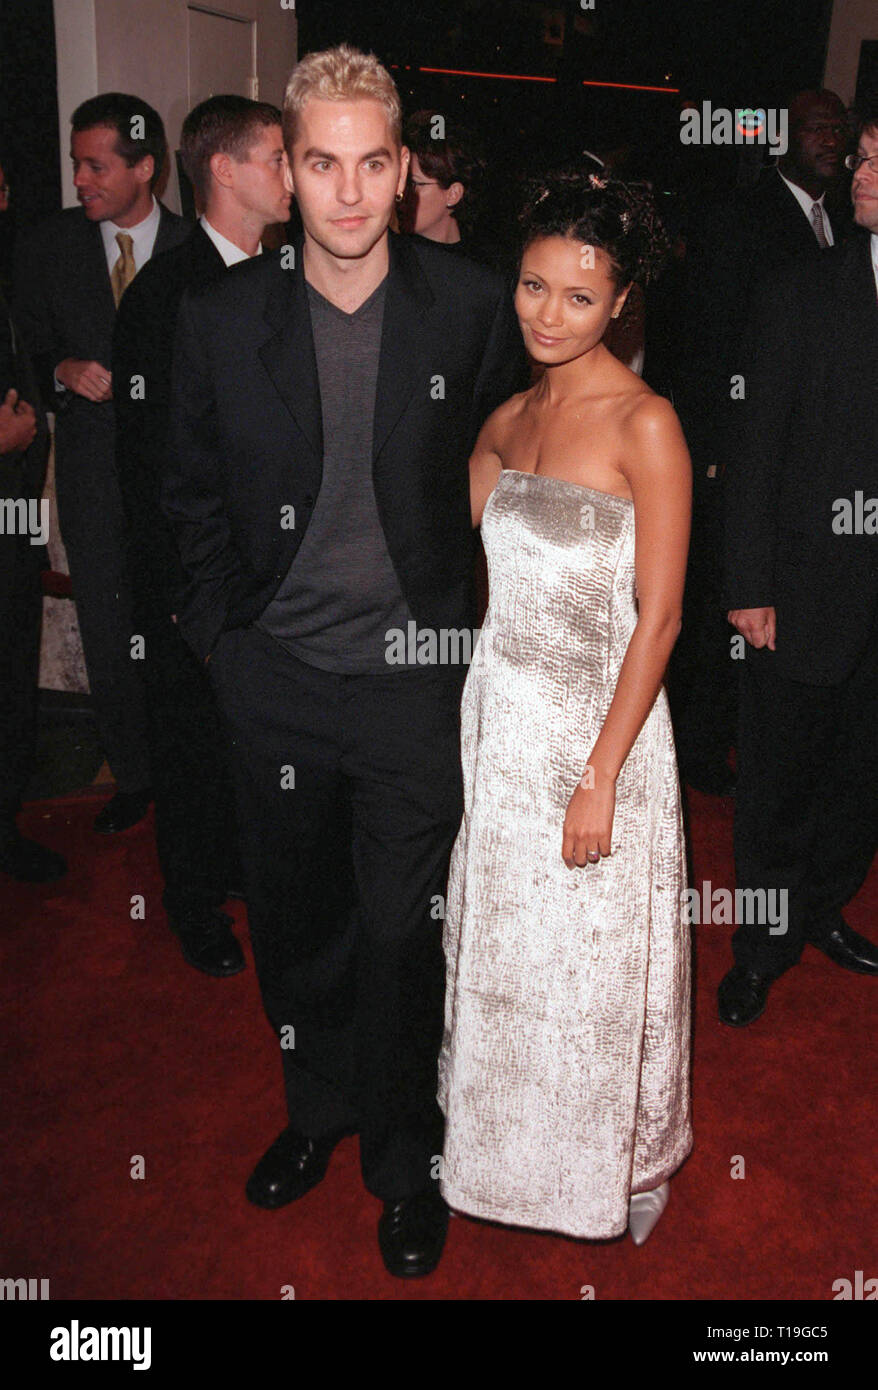 LOS ANGELES, CA - October 12, 1998: British actress THANDIE NEWTON & husband Ol Parker at the Los Angeles premiere of her new movie 'Beloved' in which she stars with Oprah Winfrey. Stock Photo